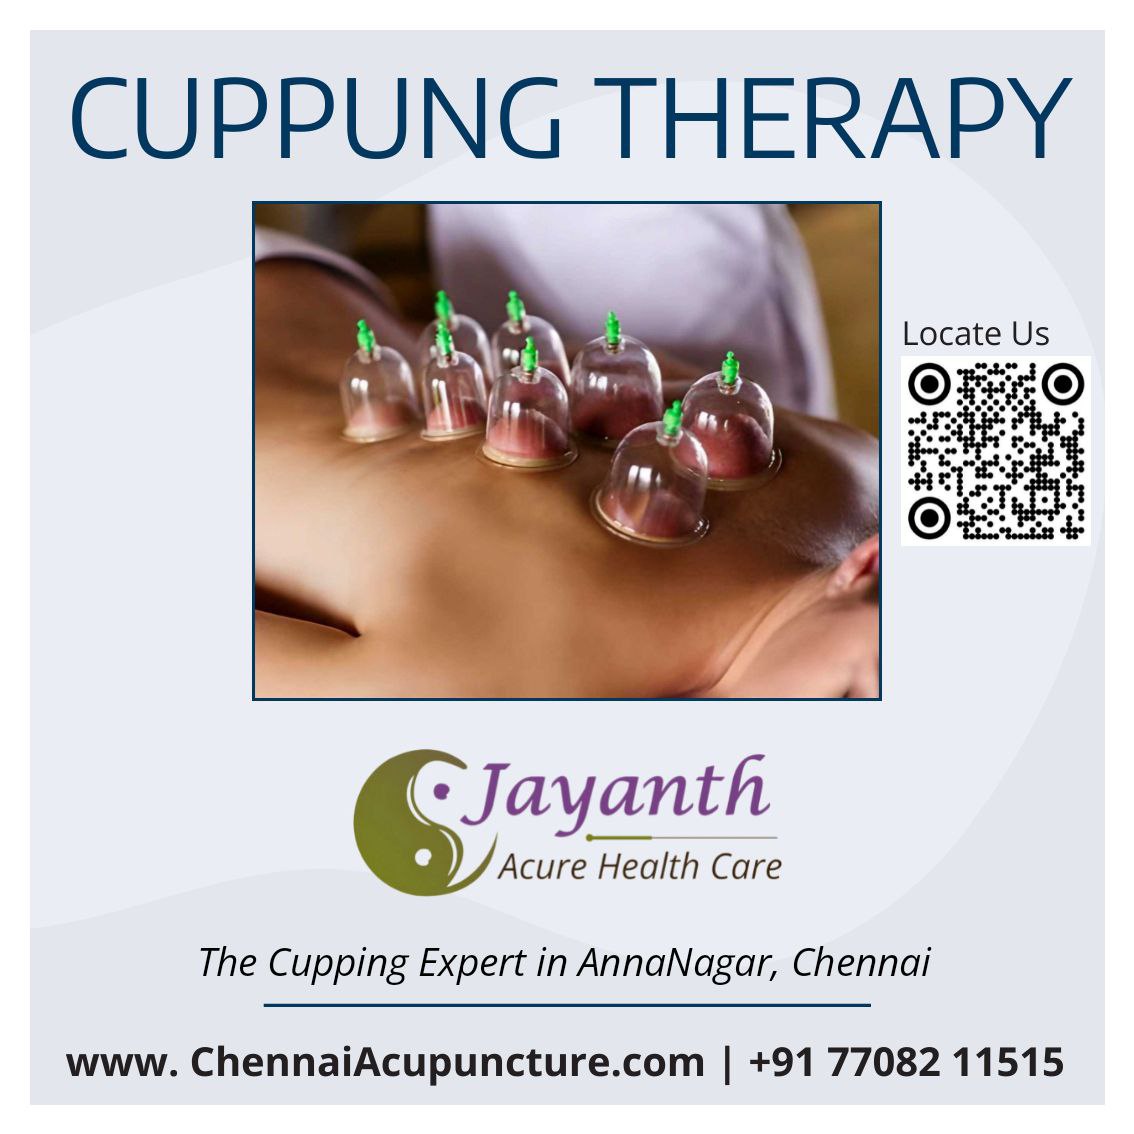 Cupping Therapy in Chennai - Cupping Expert Near Me AnnaNagarBest Acupuncture Treatment by Well Experienced Acupuncture Doctor in Chennai